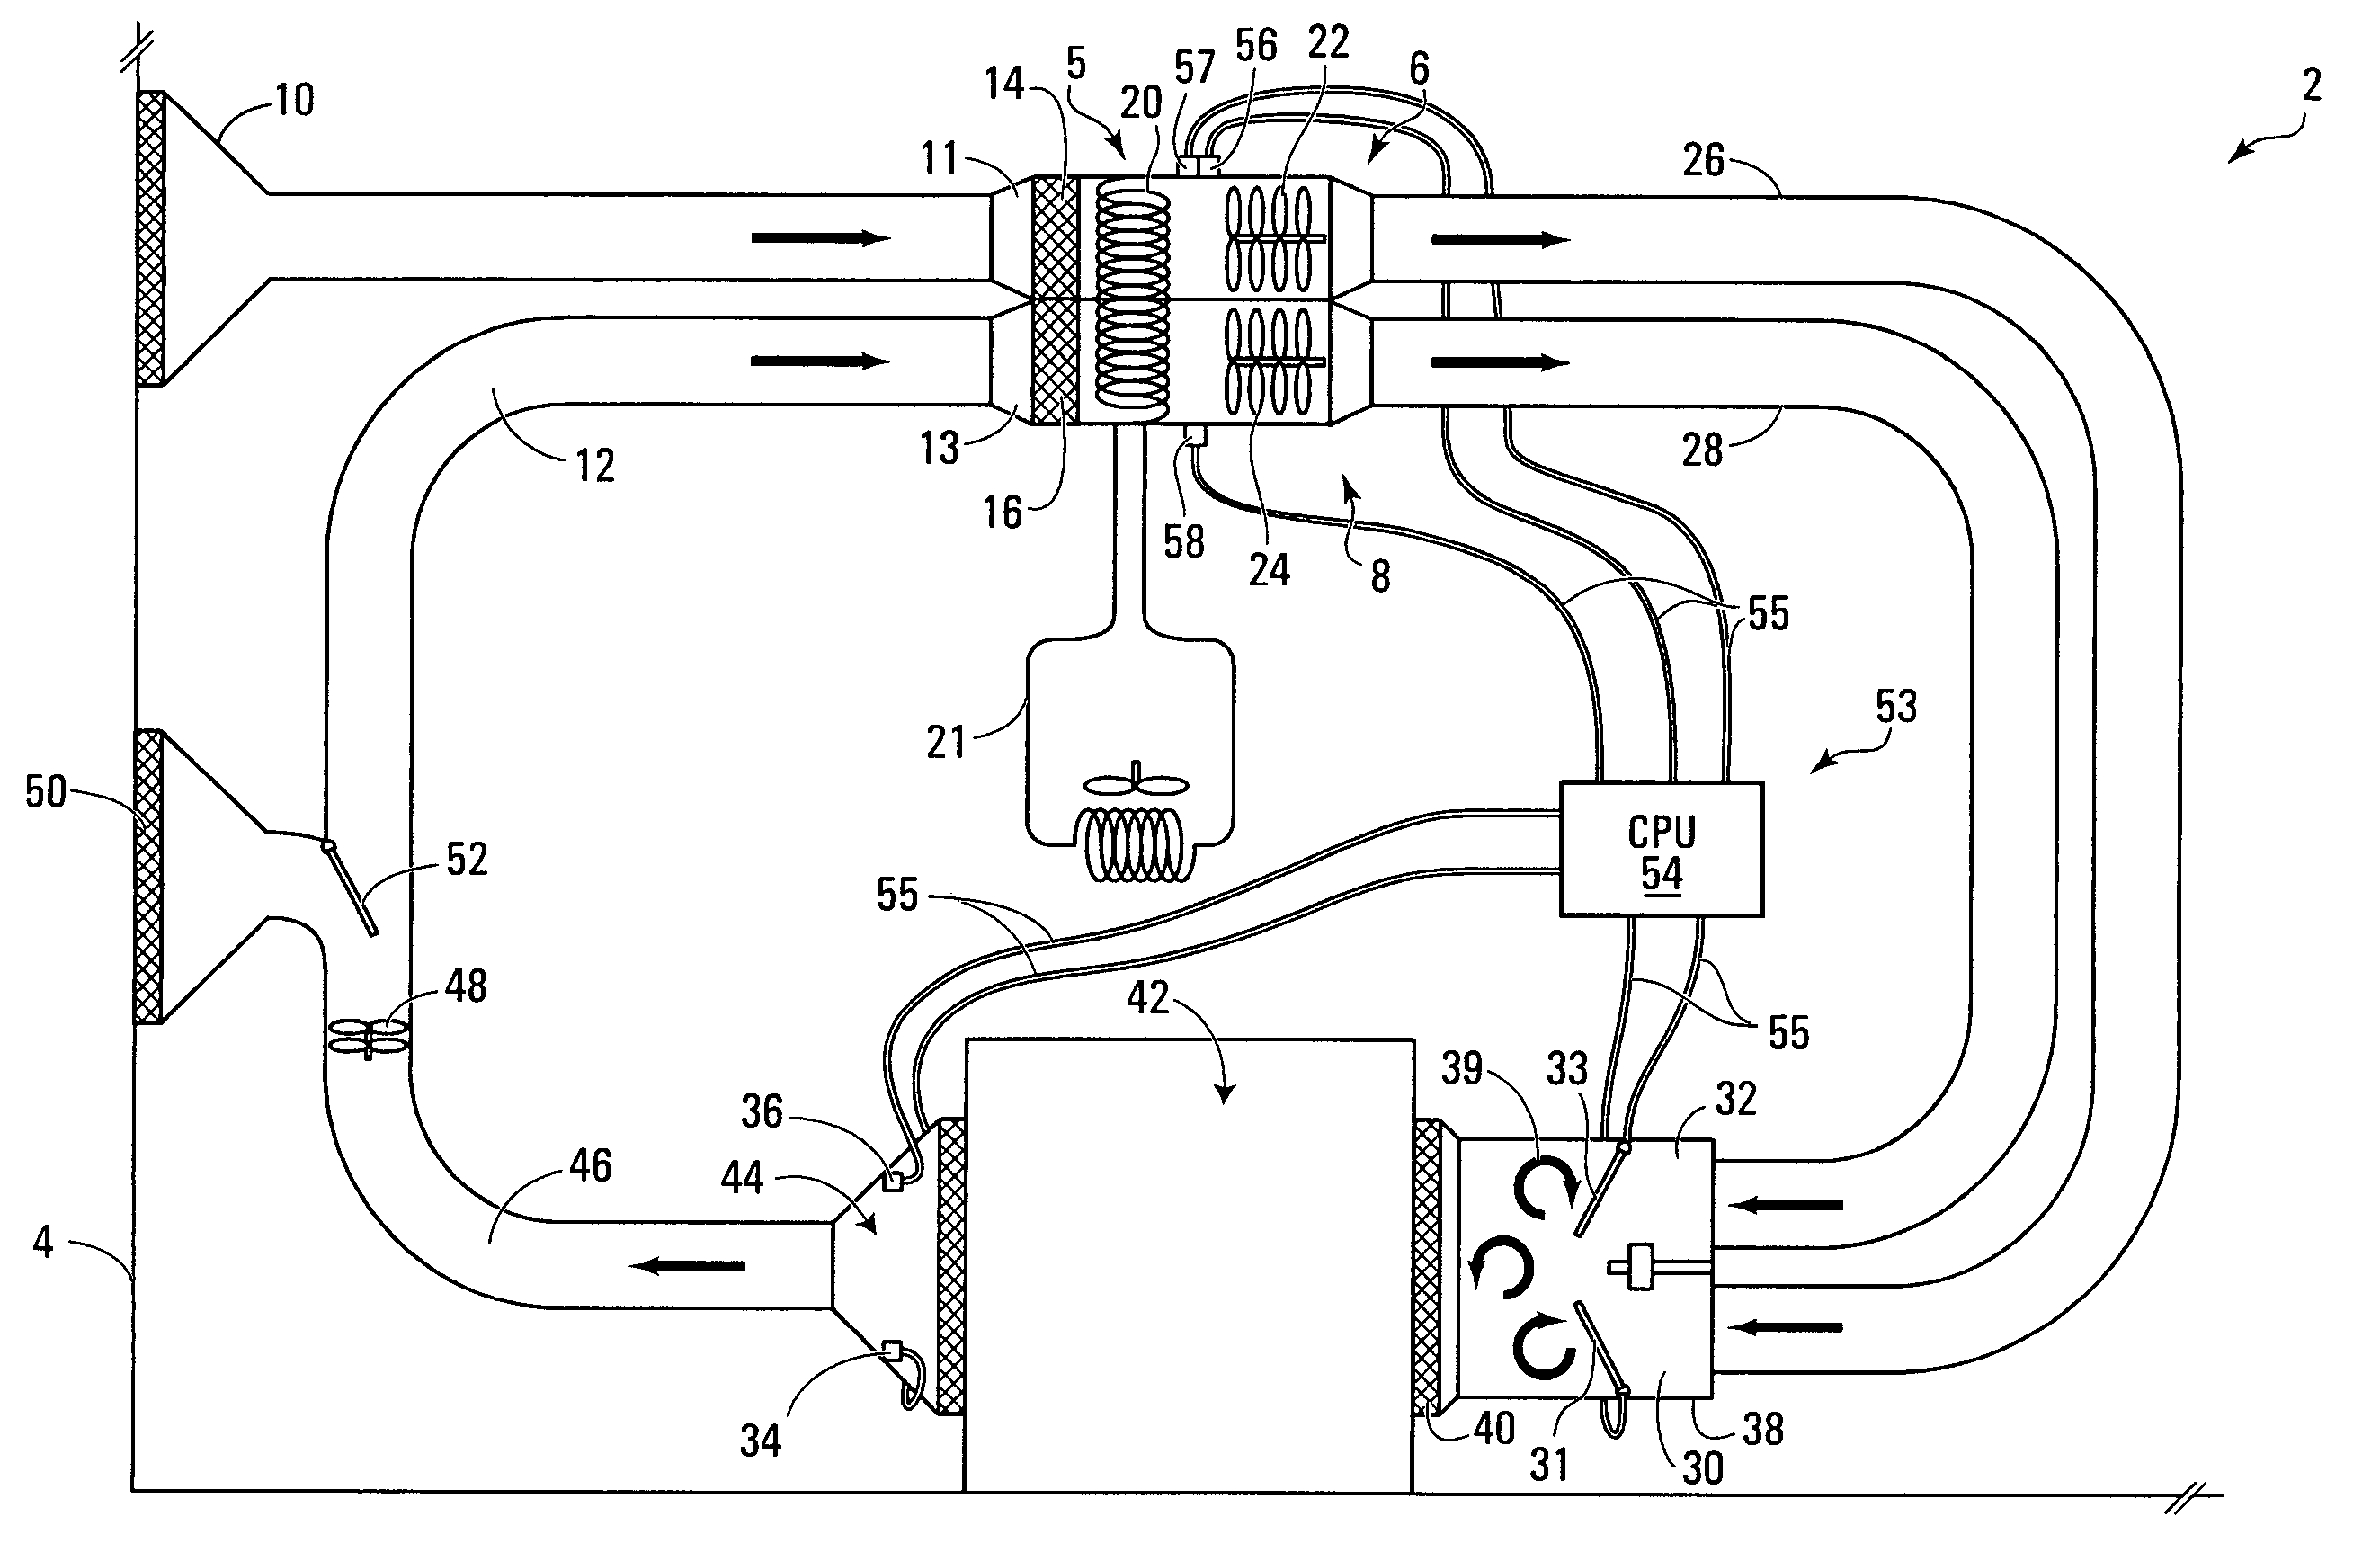 Dual-compartment ventilation and air-conditioning system having a shared heating coil